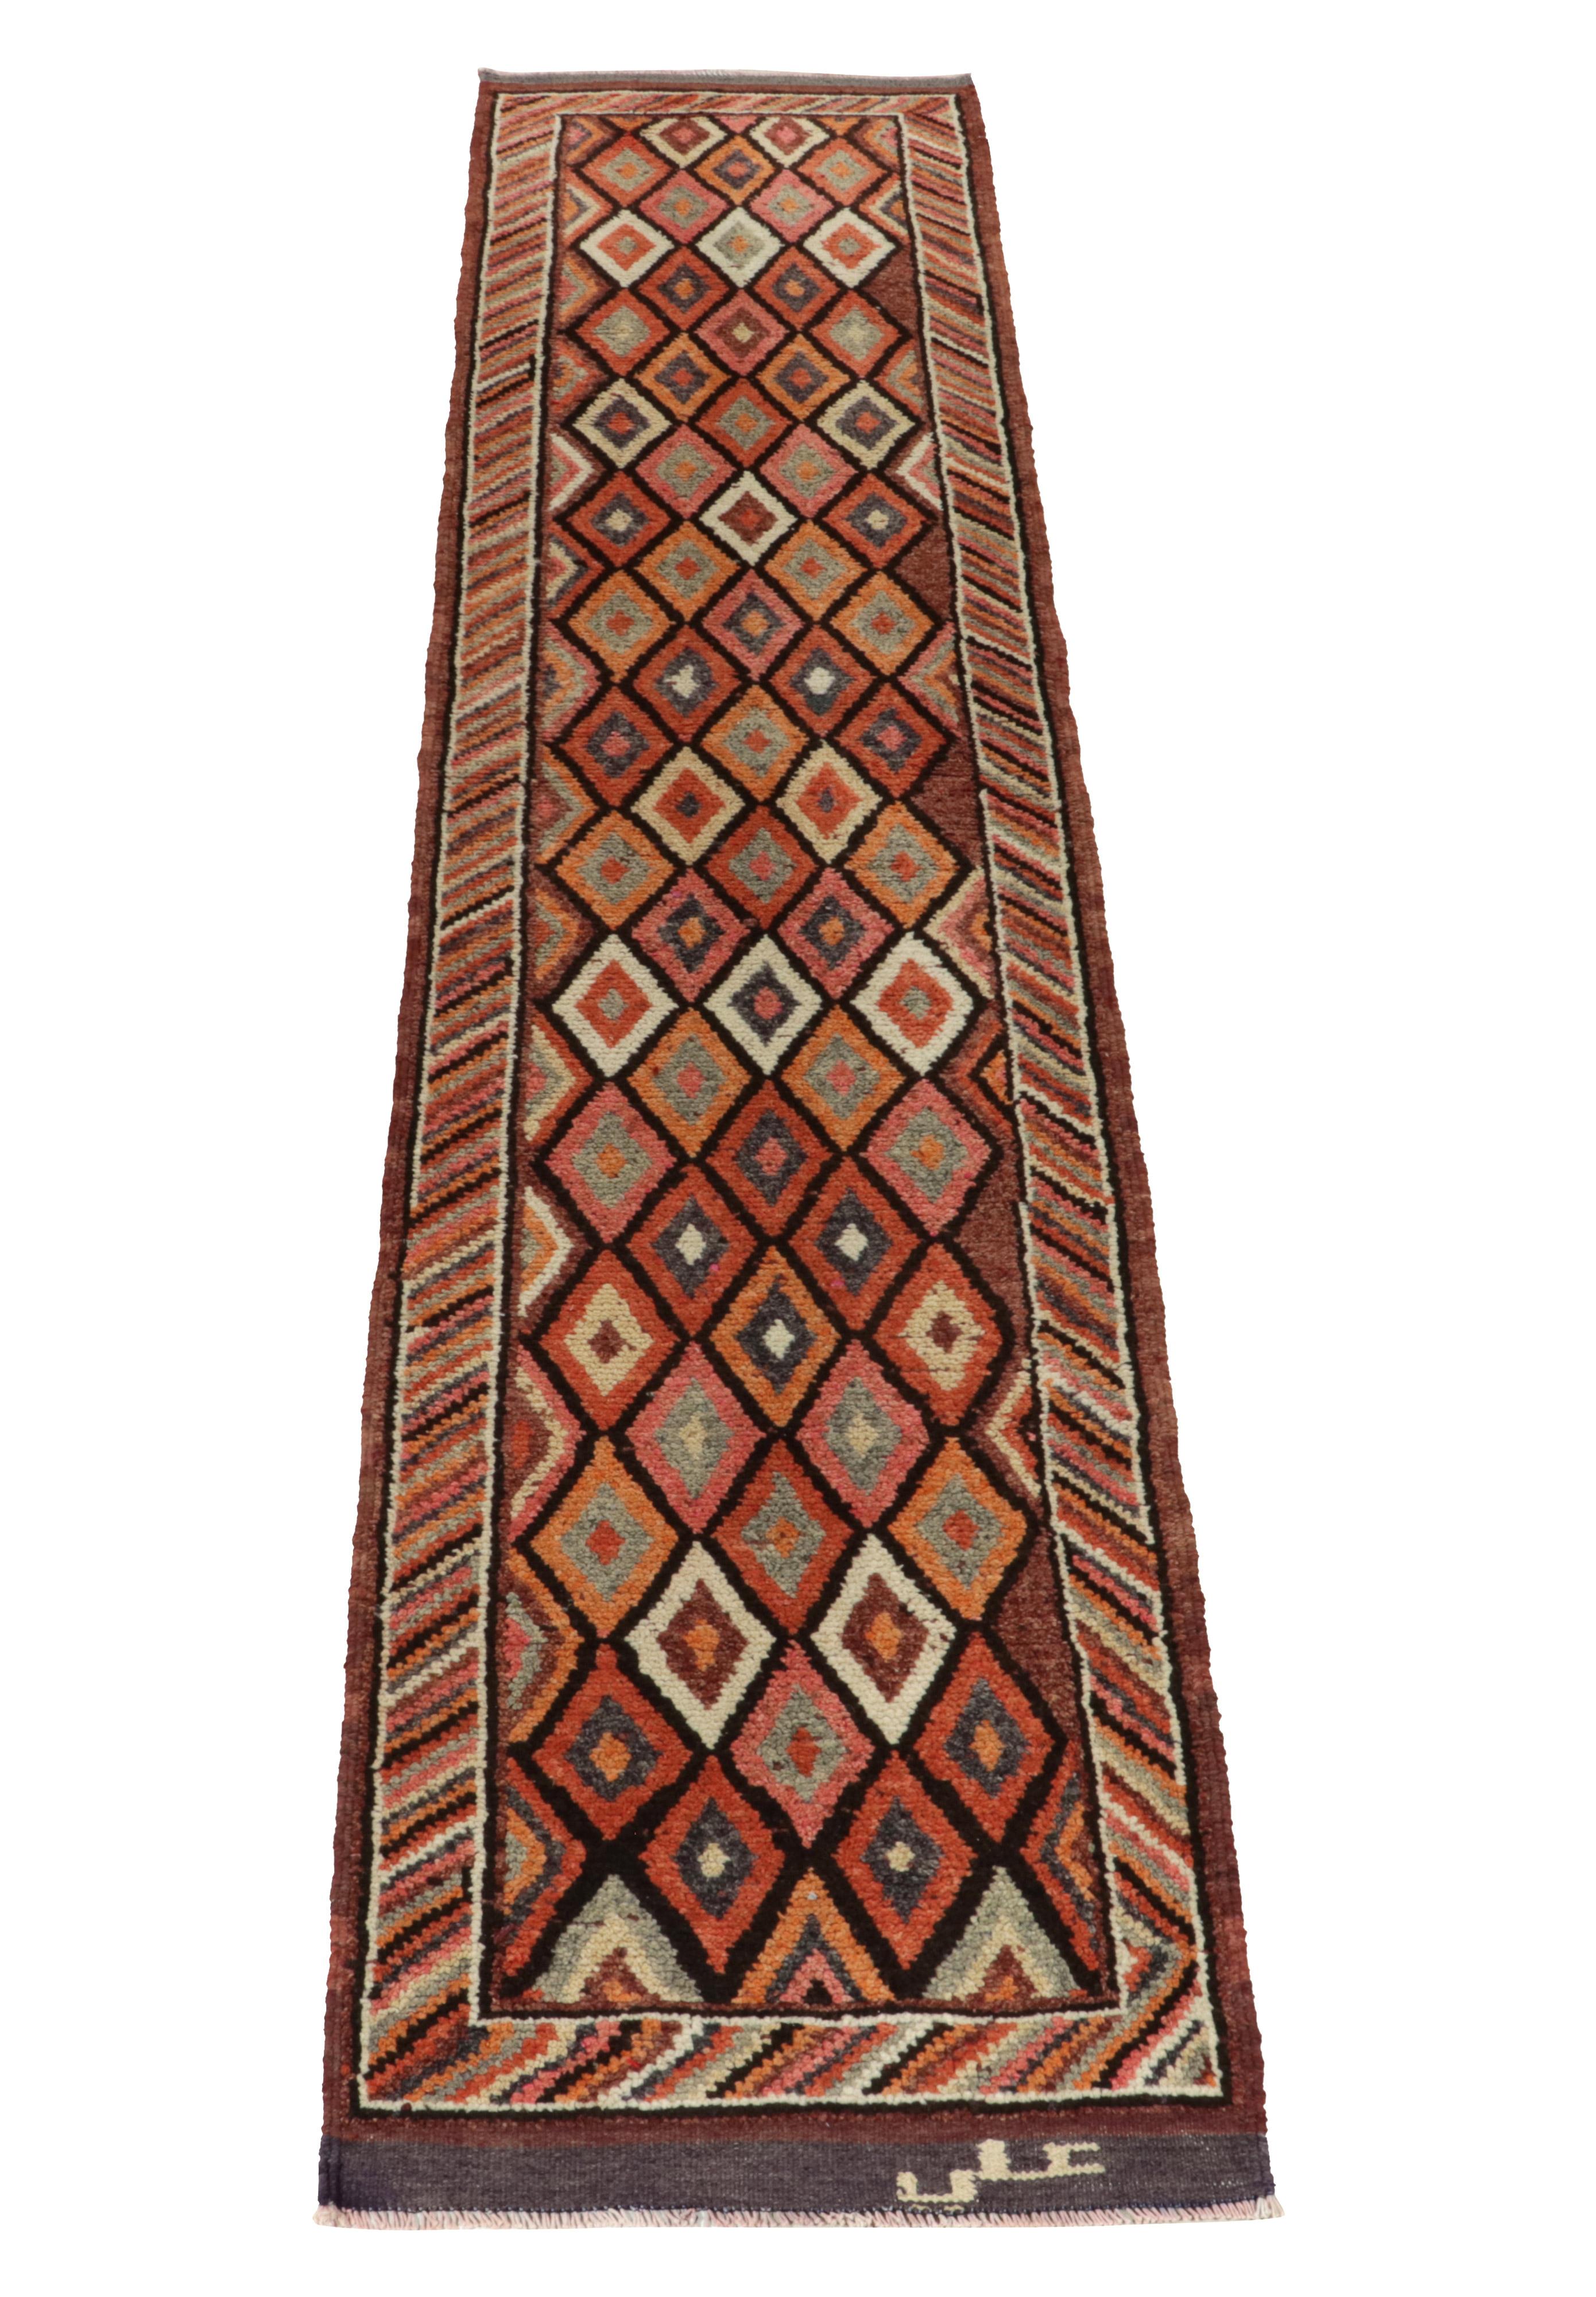 Hand-knotted in wool, a 3x13 vintage runner from Rug & Kilim’s prominent new curation of rare tribal pieces. 

Originating from Turkey circa 1950-1960, the drawing relishes in rich orange, pink, red & black with scintillating movement in a series